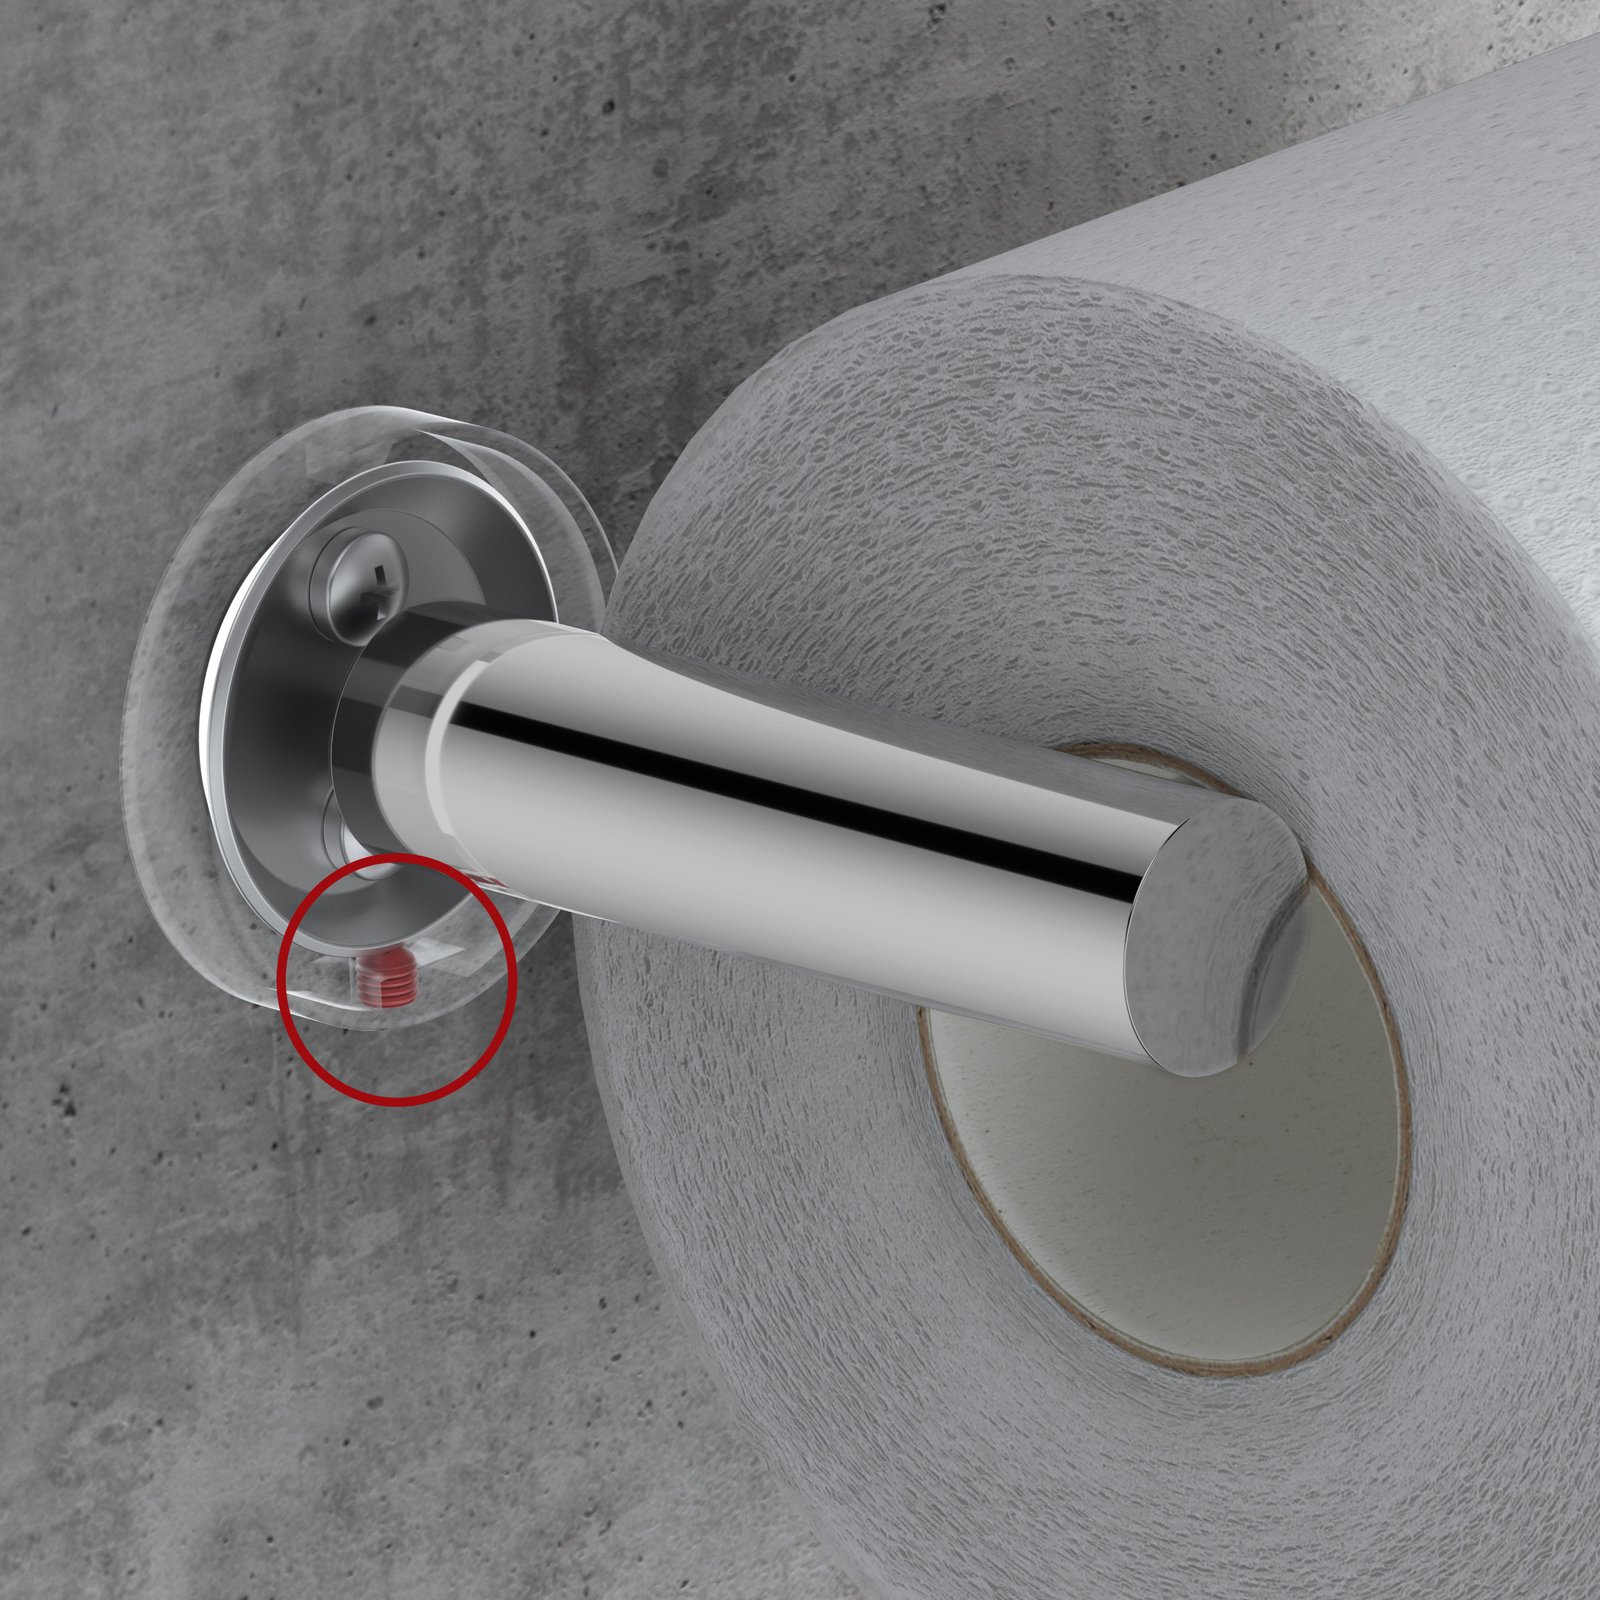 The cause of bathroom accessories coming loose is the grub screw